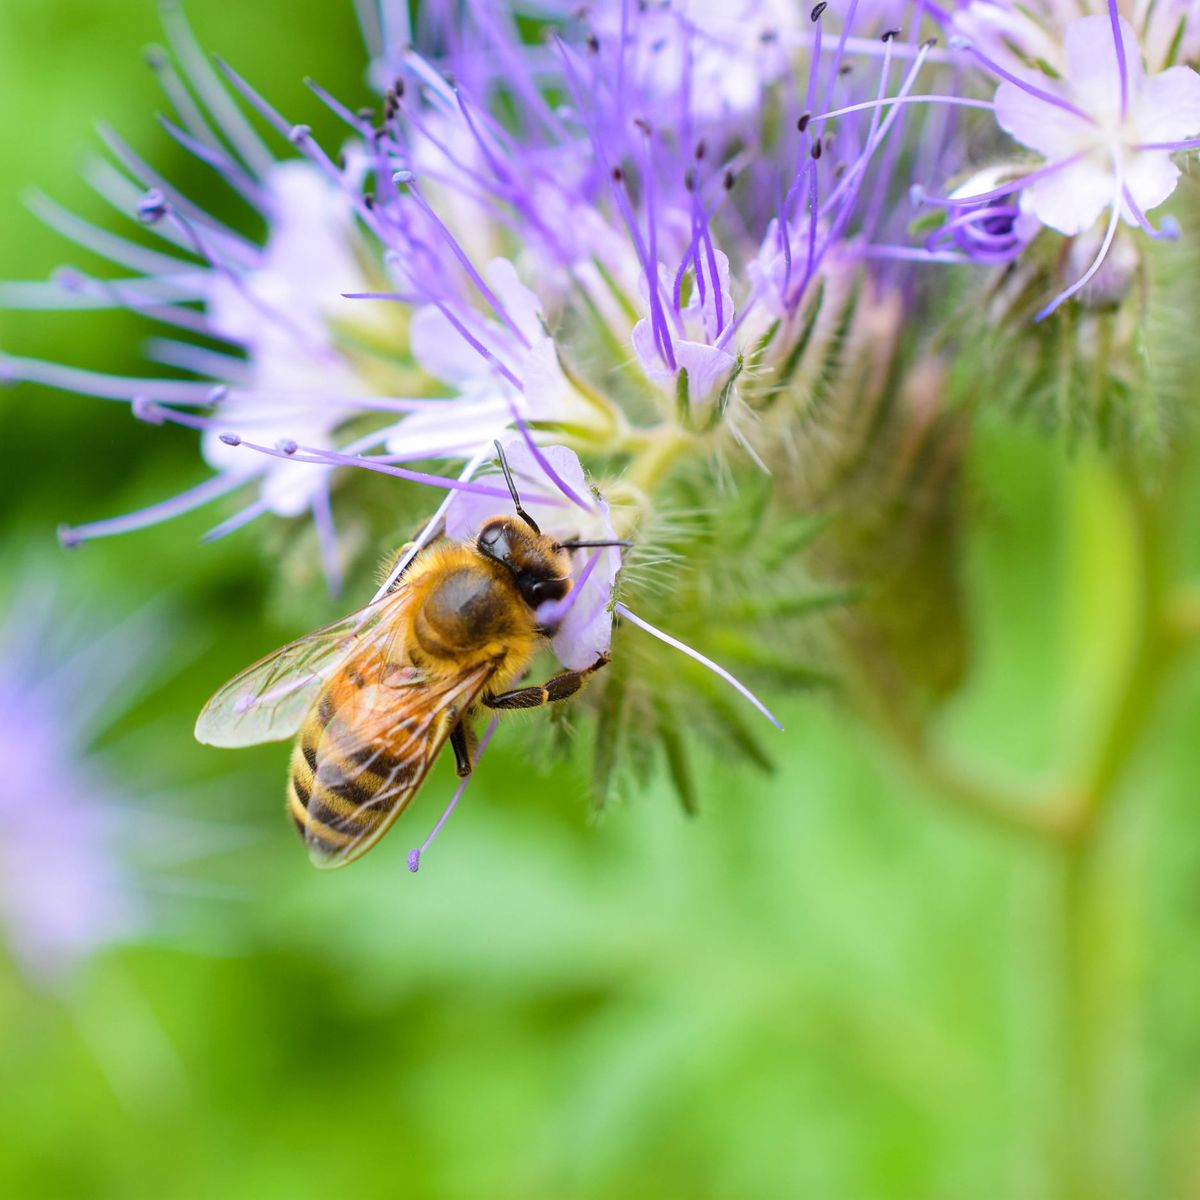 The Dirt on Bees: Soil Health for Pollinators